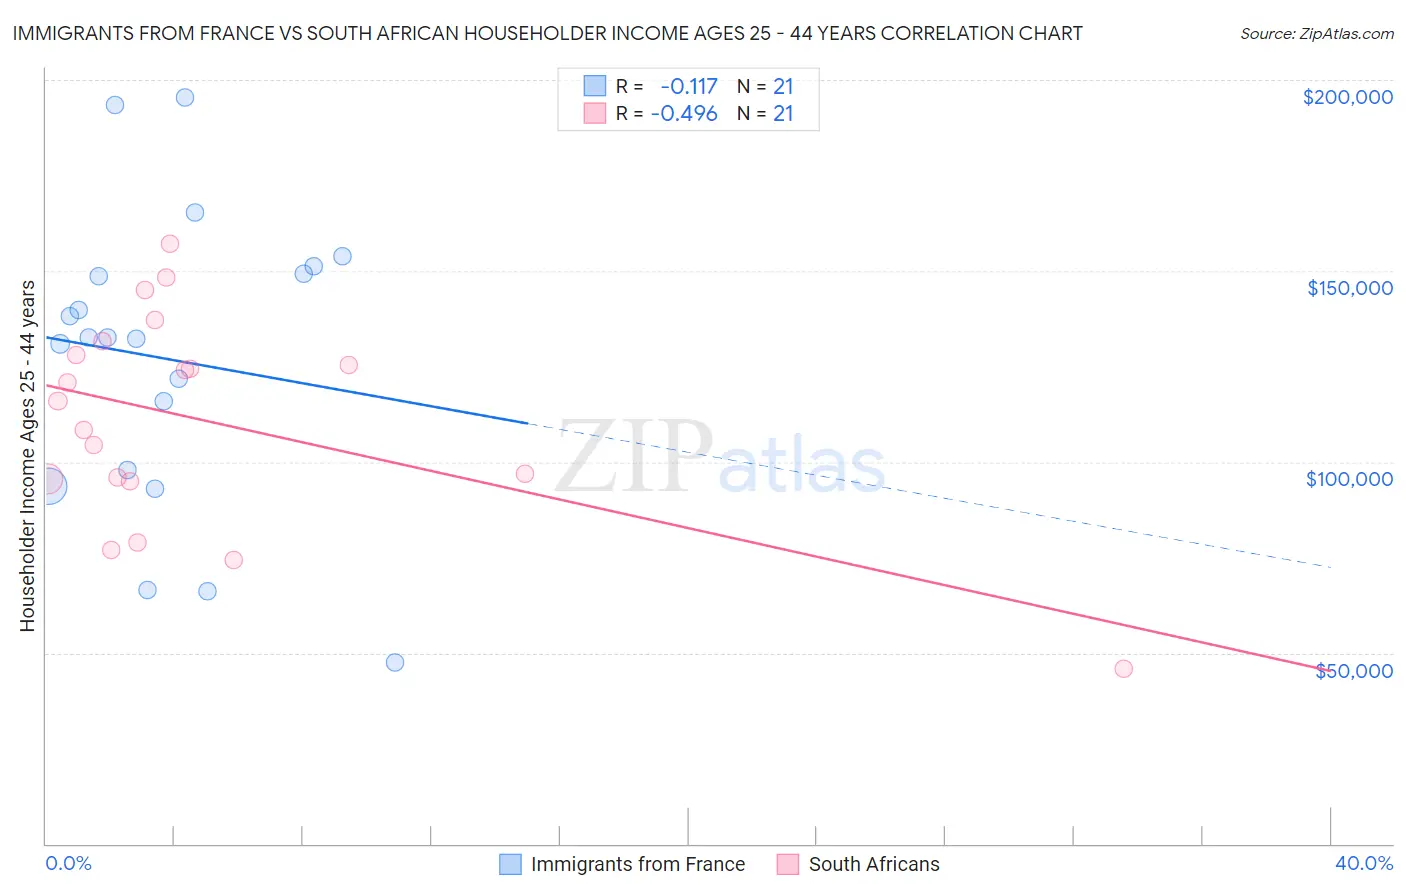 Immigrants from France vs South African Householder Income Ages 25 - 44 years